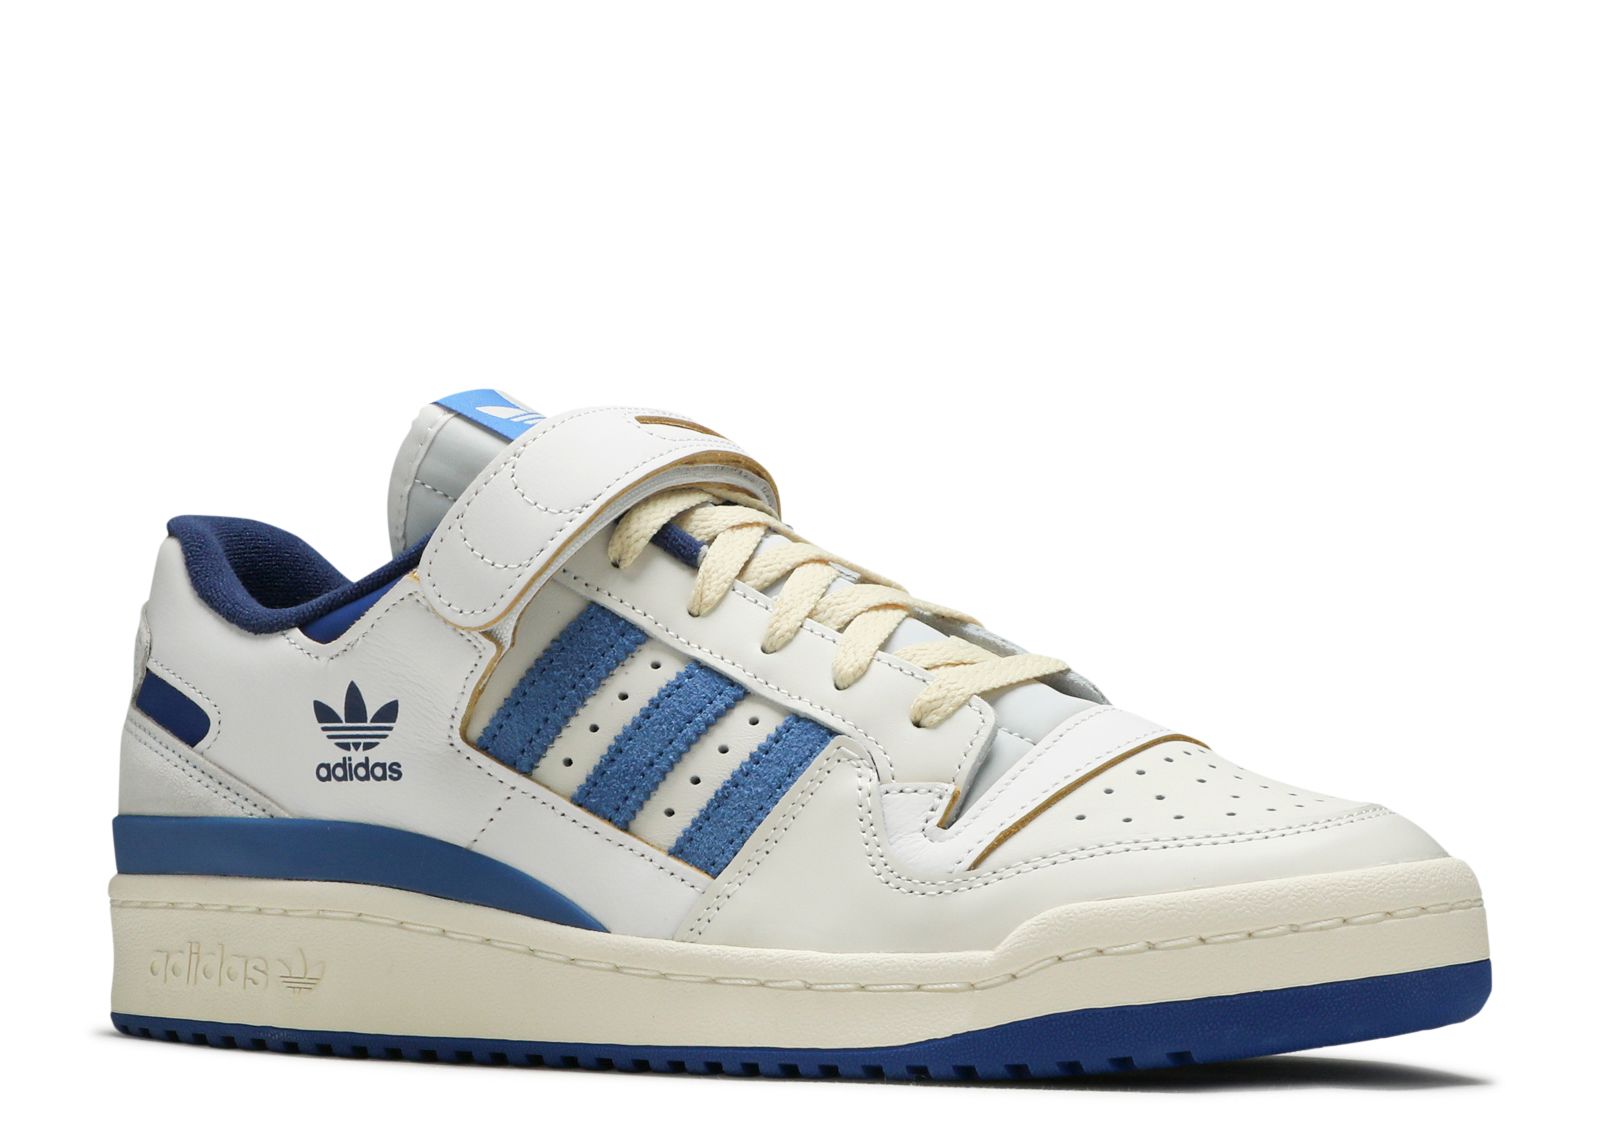 Forum 84 Low OG 'Bright Blue' - Adidas - S23764 - off white/bright